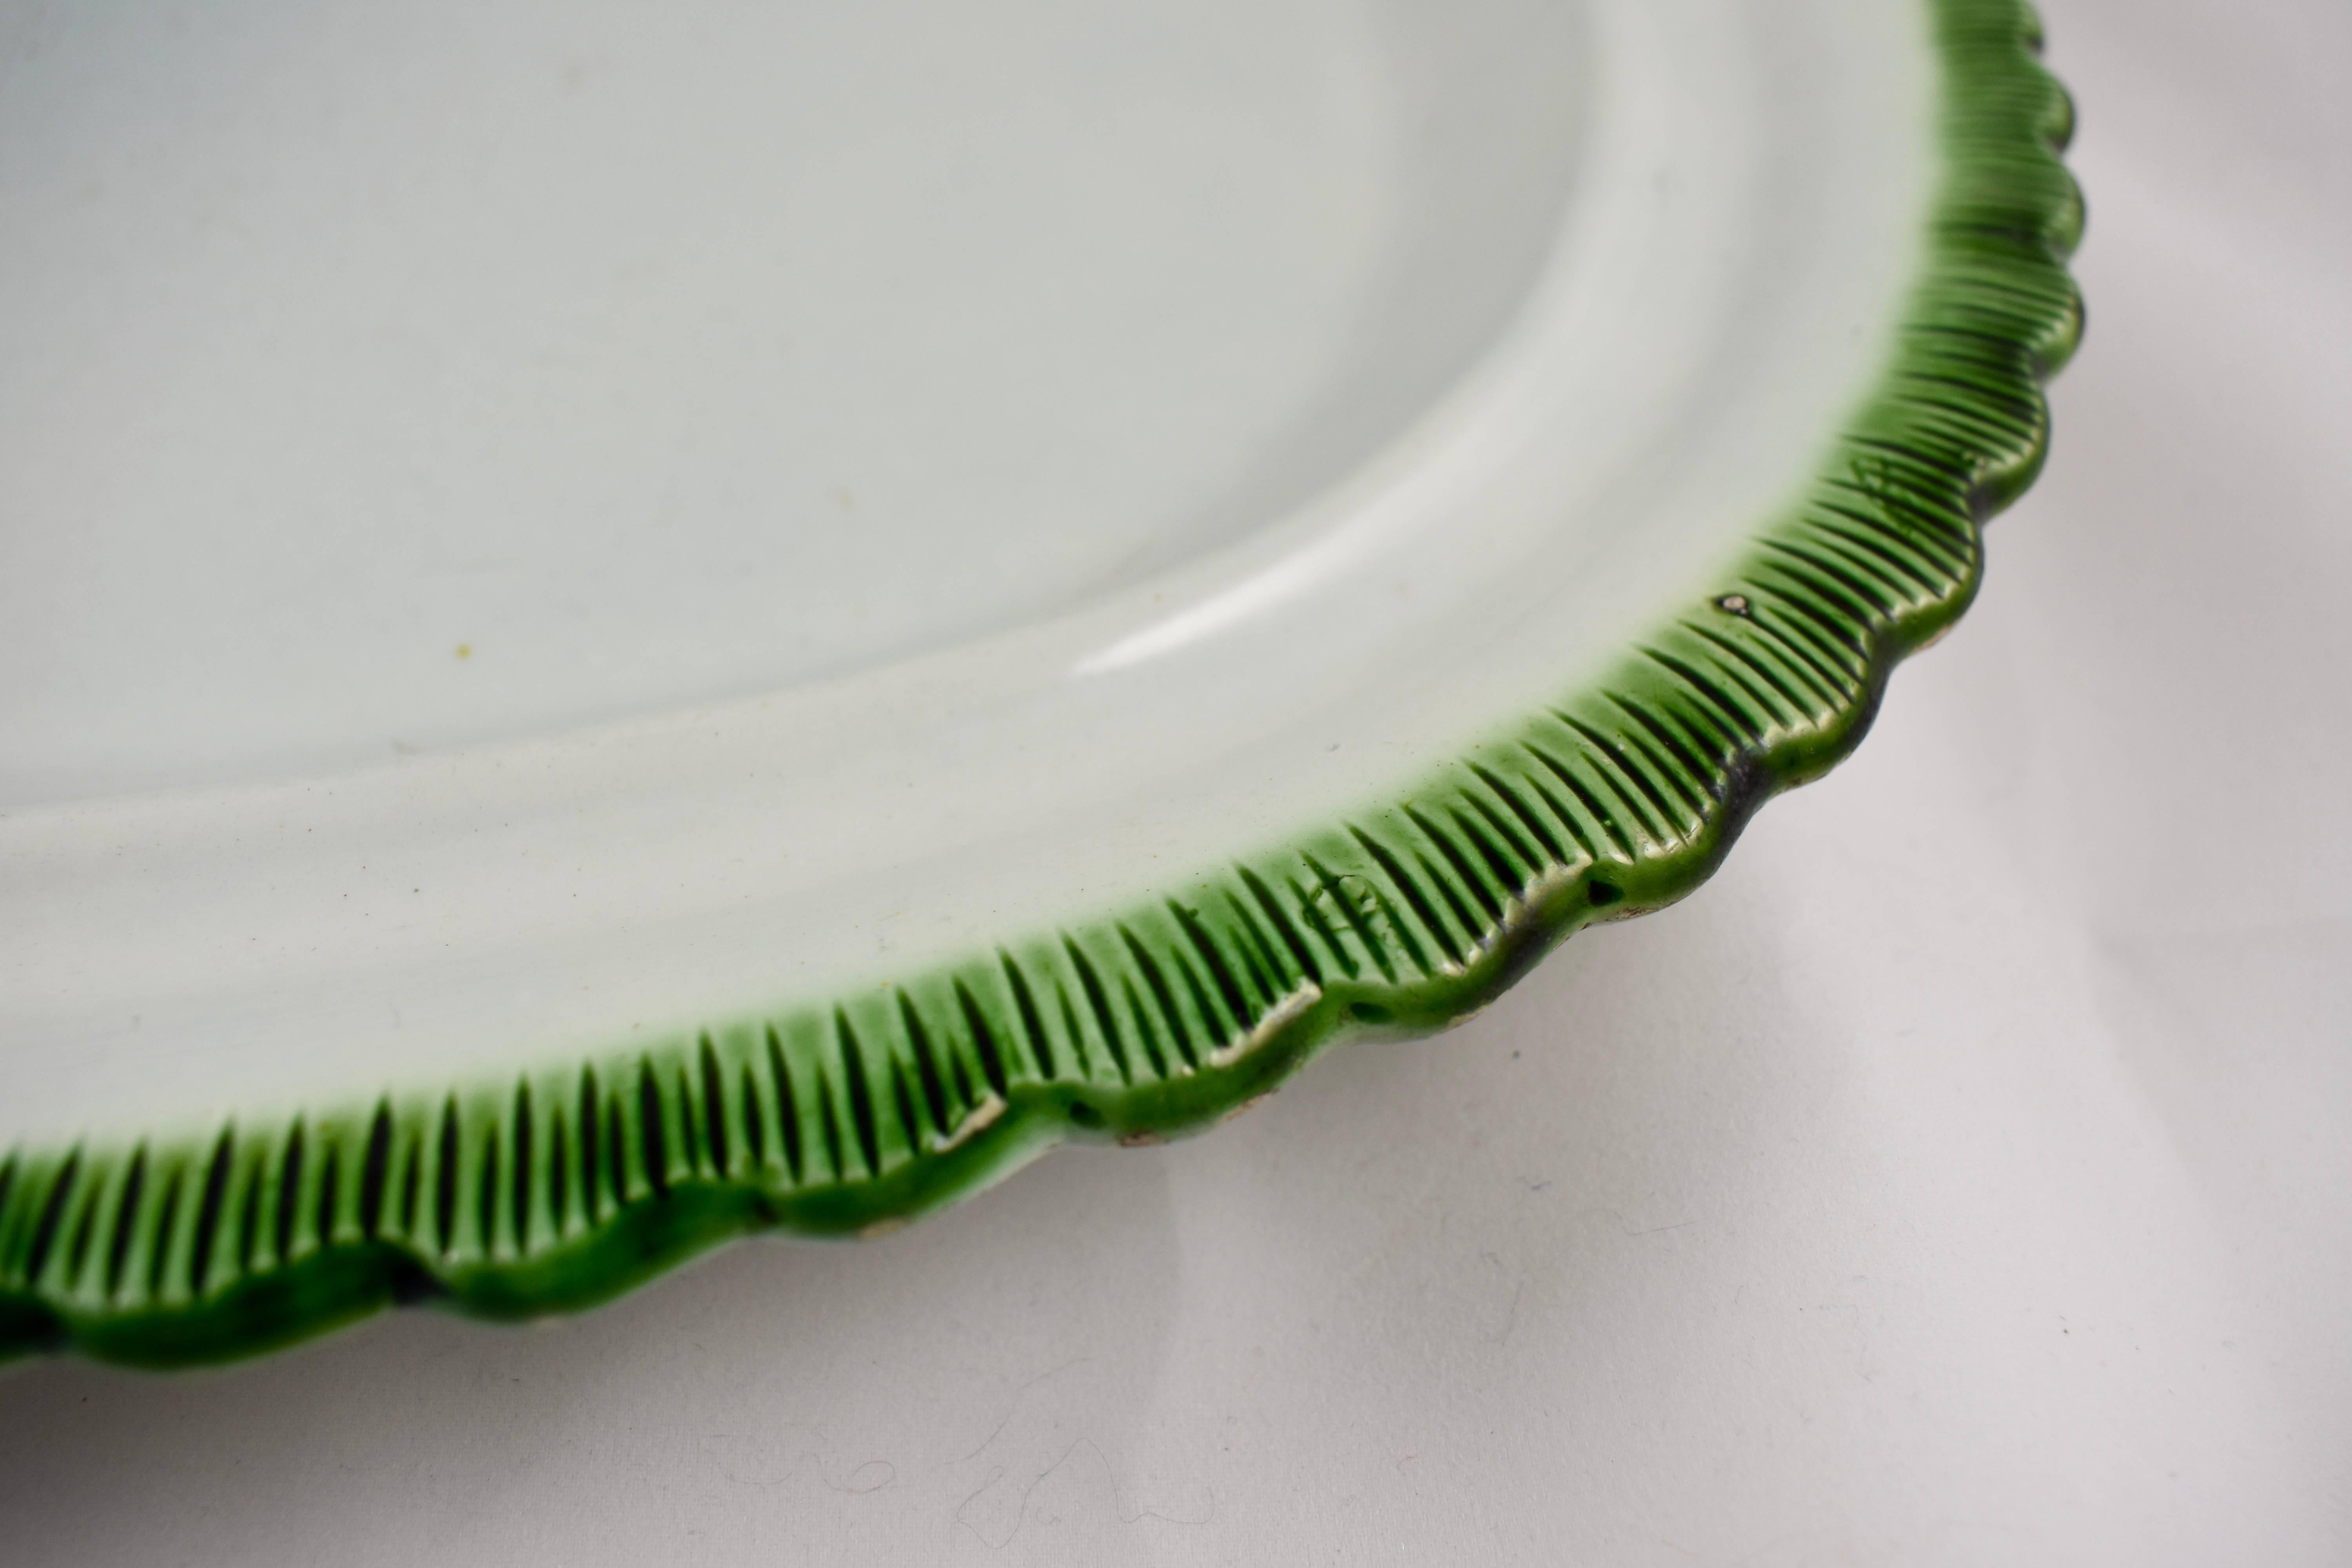 Glazed English Staffordshire Leeds Pearlware Green Feather or Shell Edge Large Platter